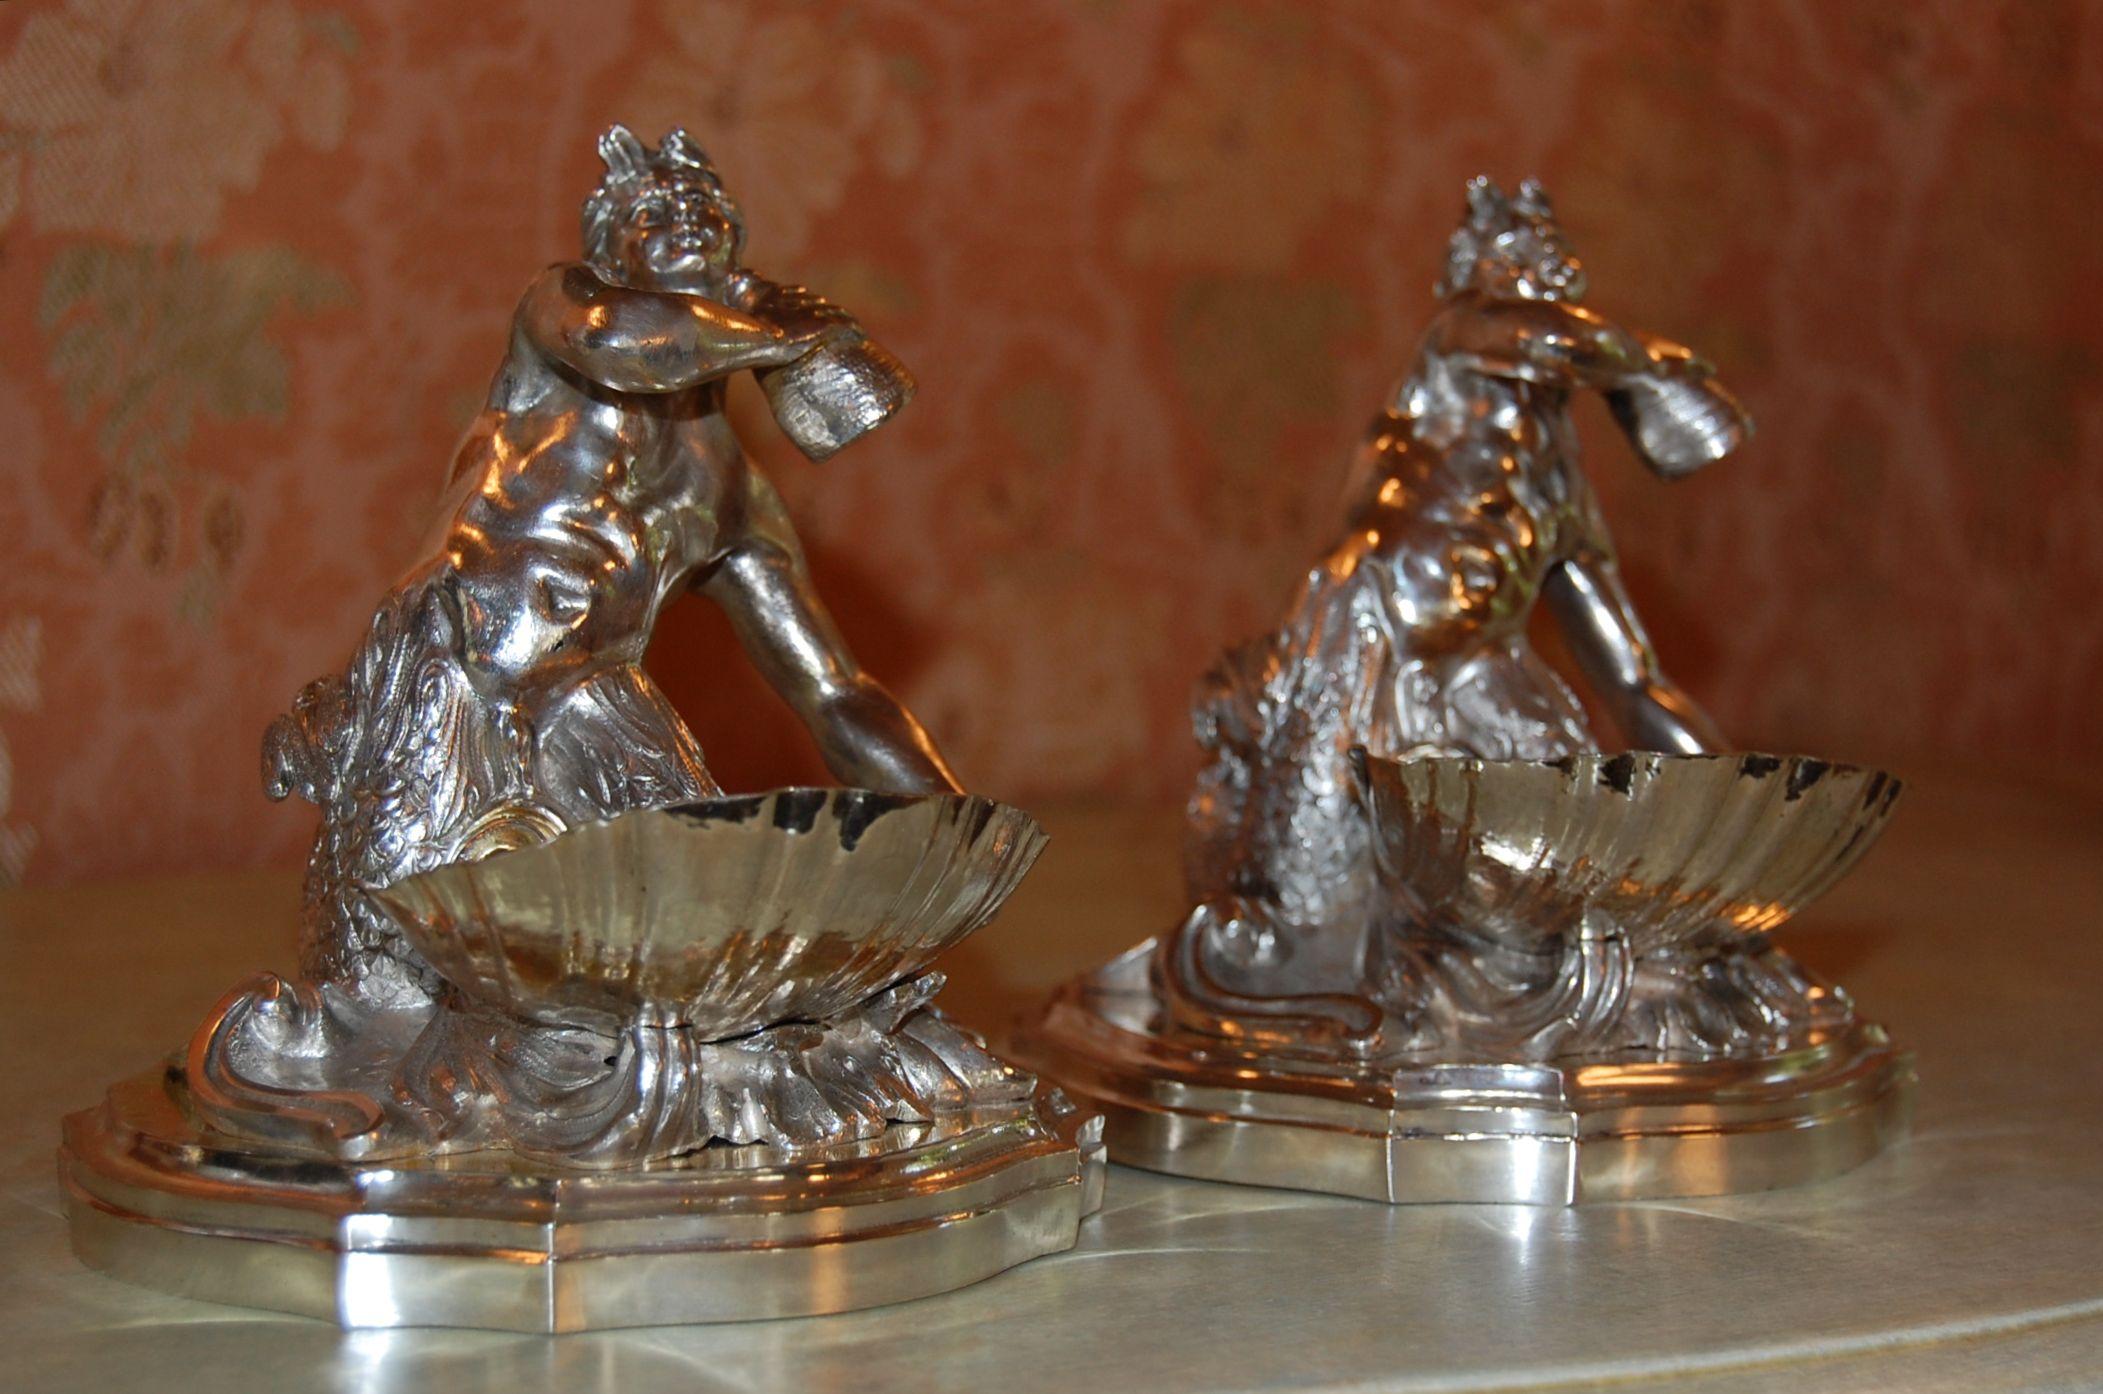 British Silver Plated Candy/ Nut Bowls Depicting a Neptune God-Like Mermaid Figure, Pair For Sale